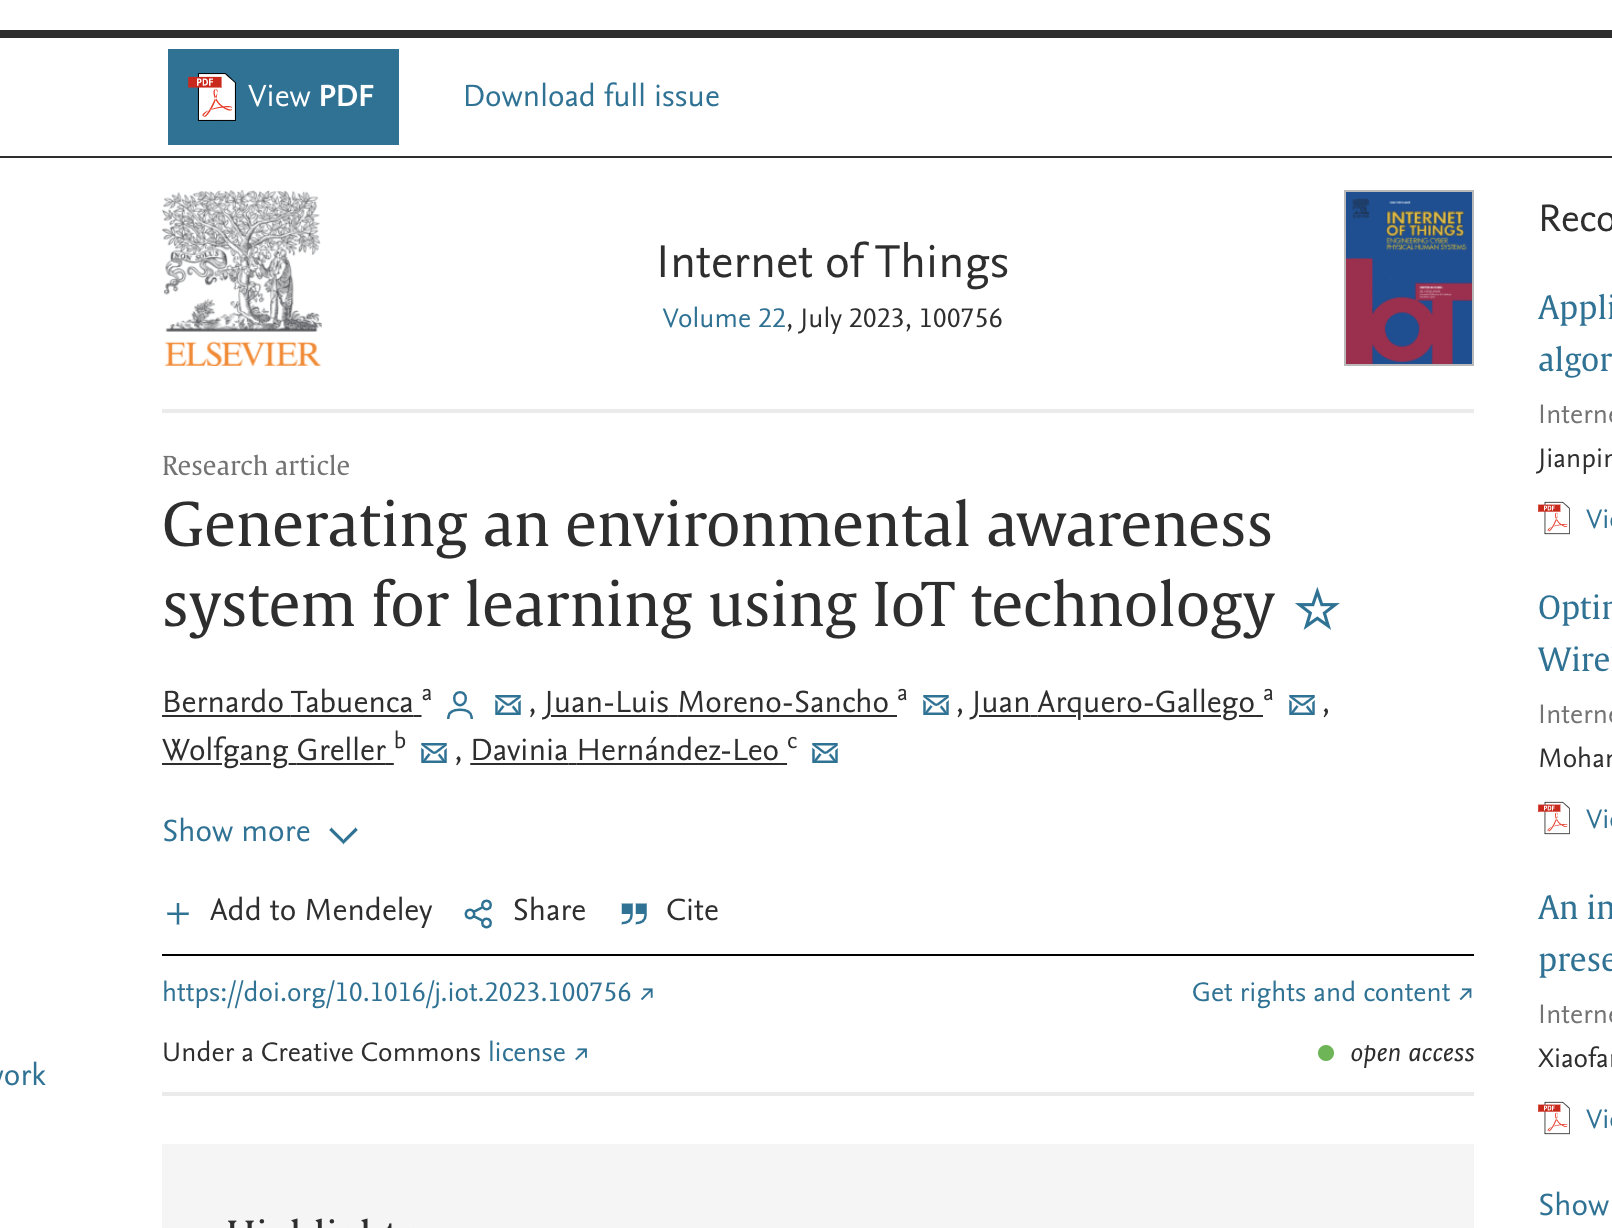 New publication: Generating an environmental awareness system for learning using IoT technology